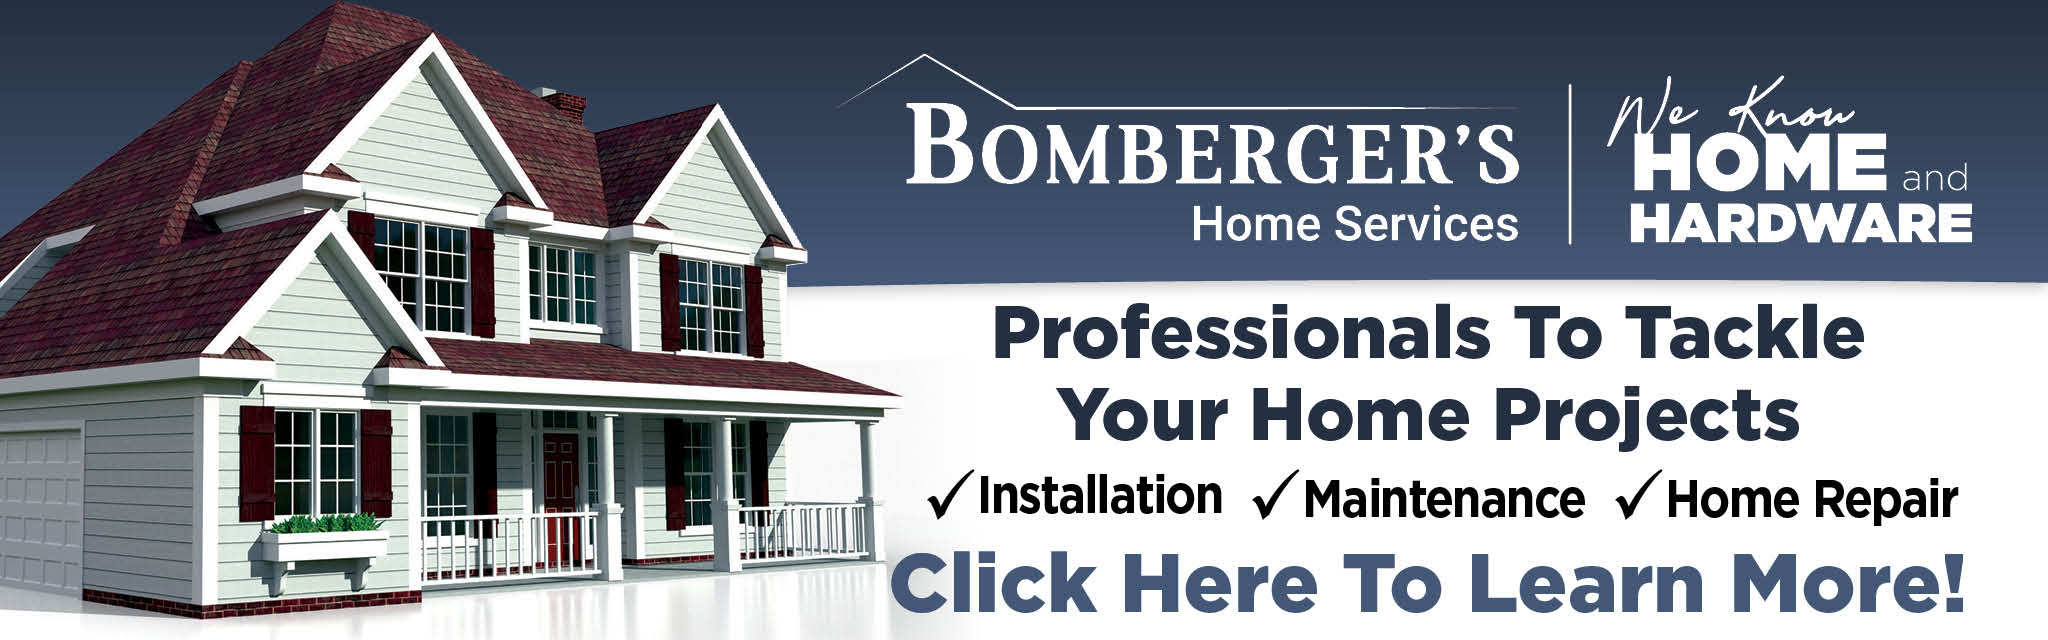 Bombergers Home Services Web Banner